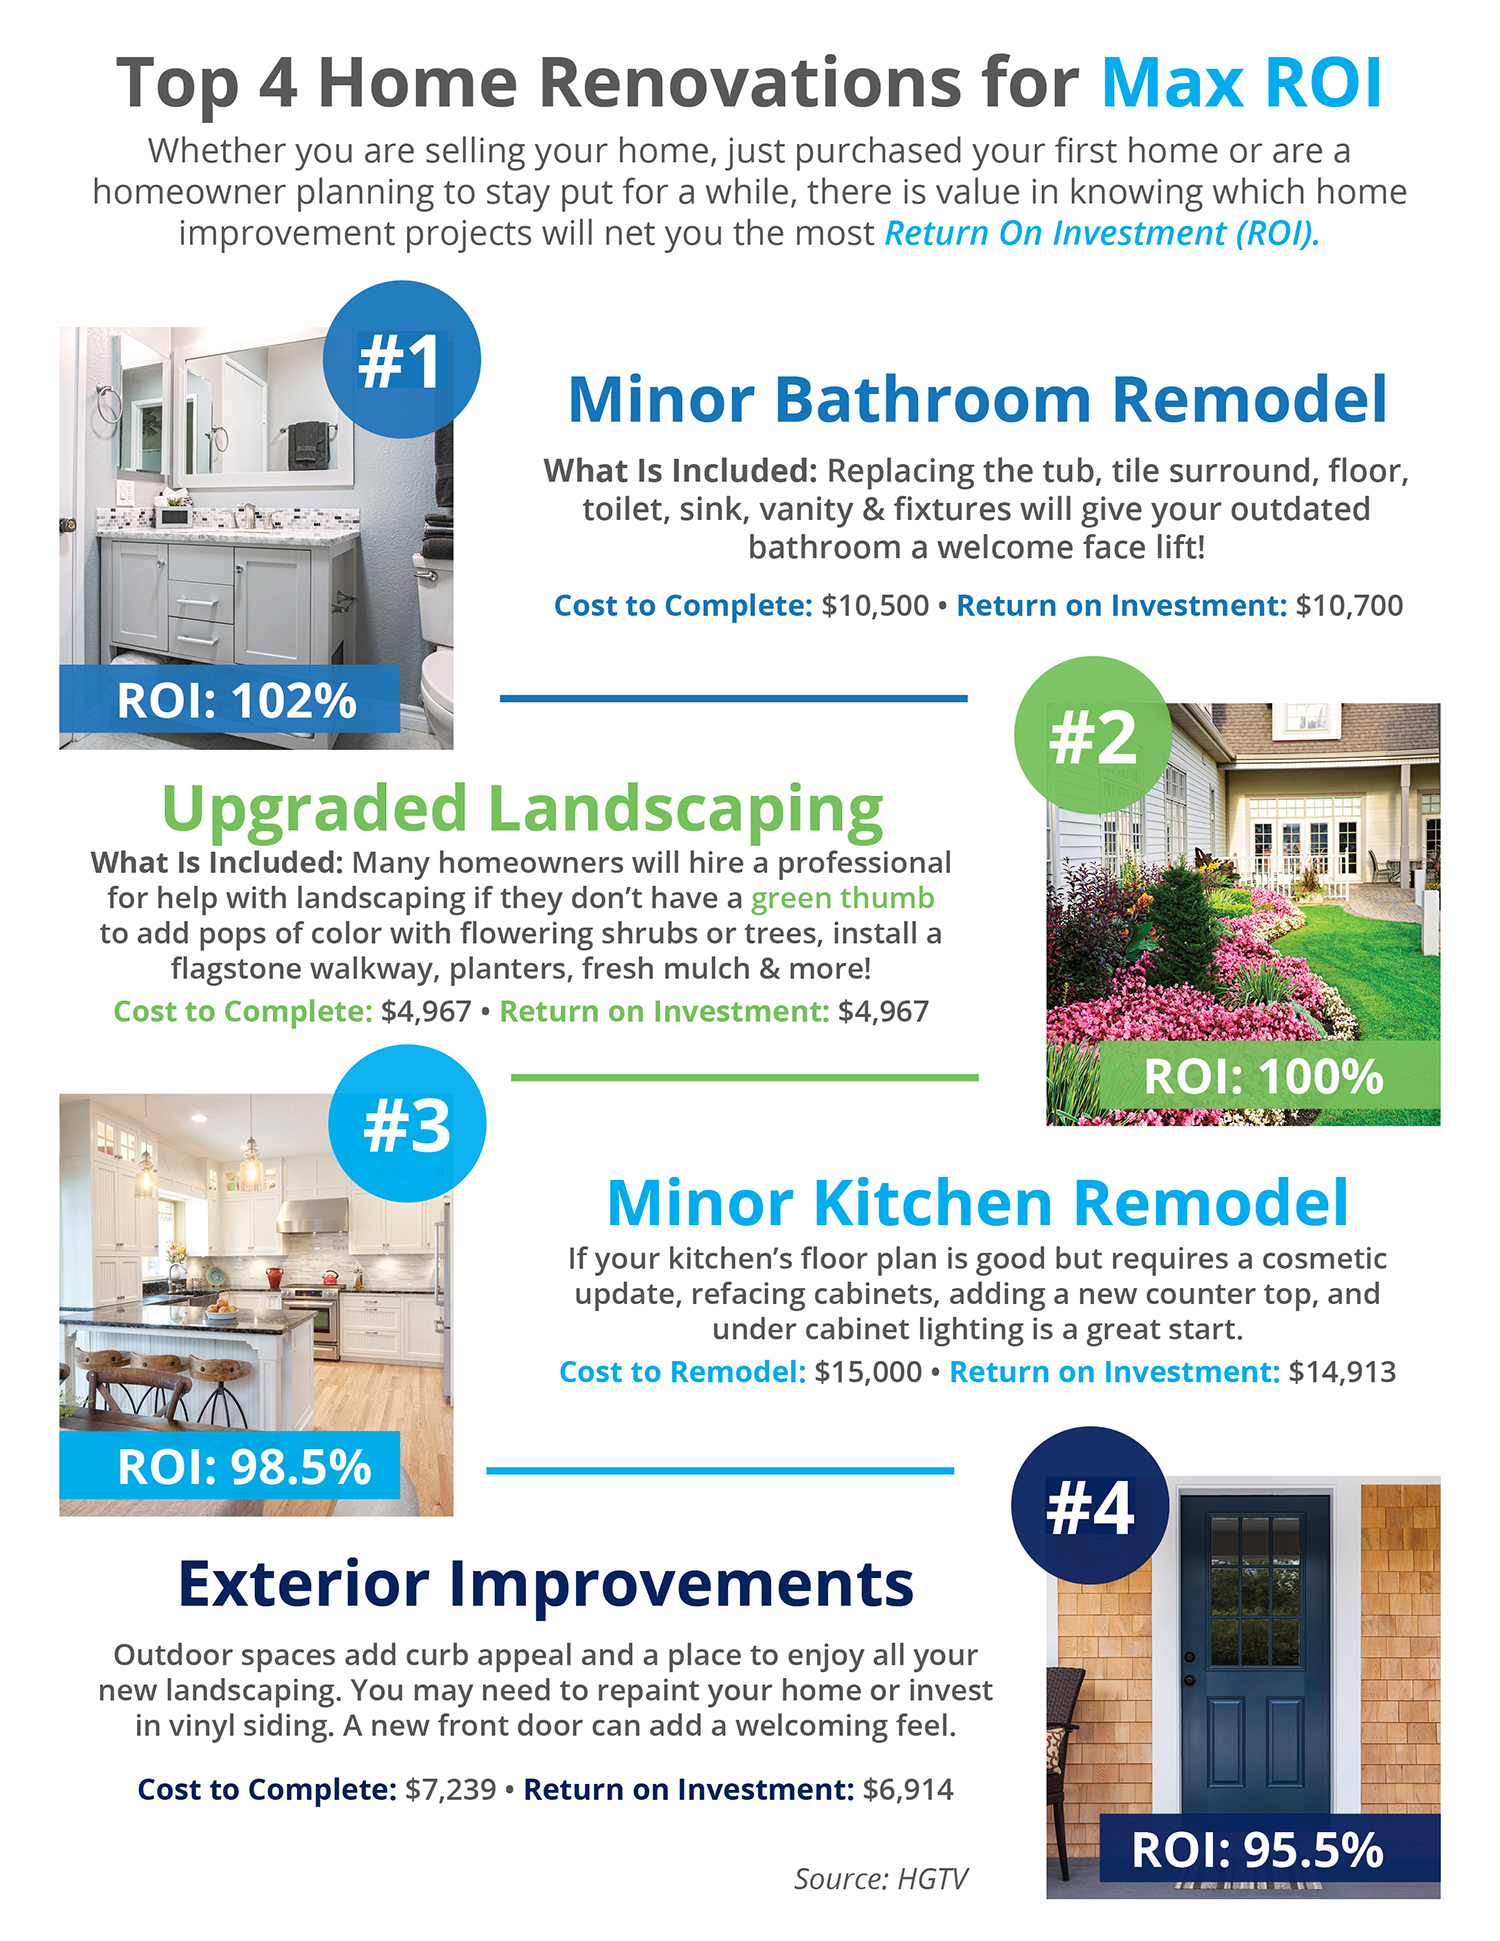 Top 4 Home Renovations for Max ROI [INFOGRAPHIC] | Simplifying The Market 